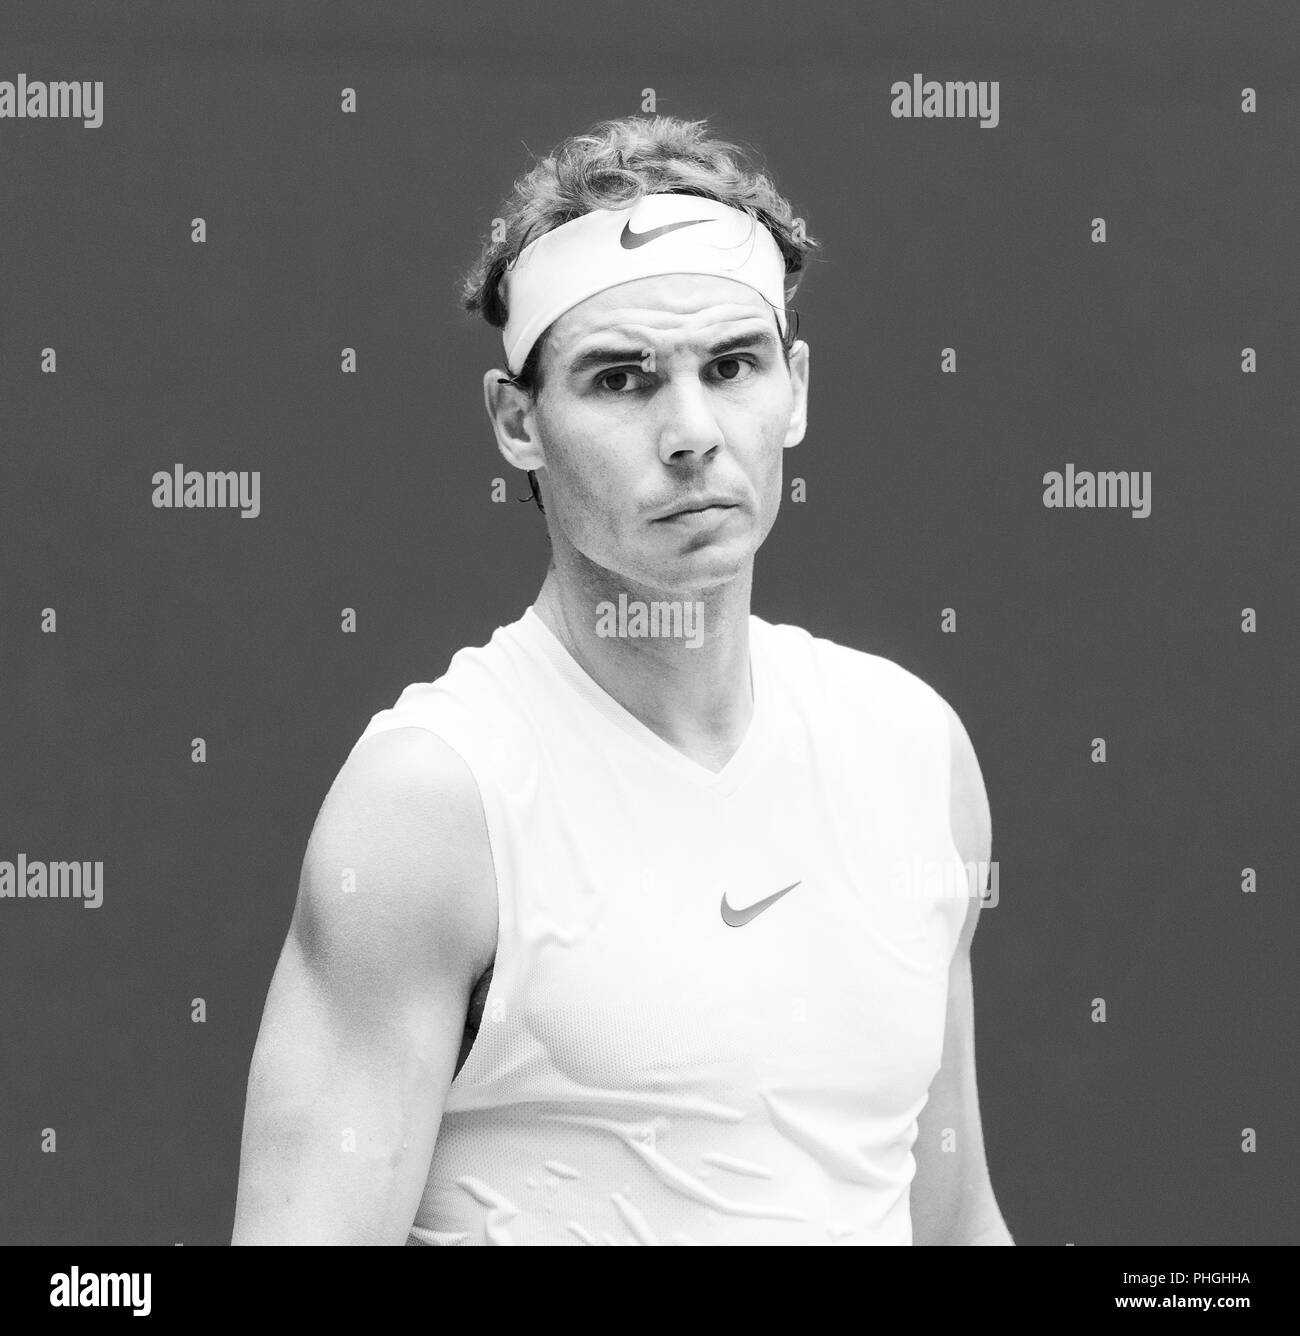 New York, United States. 31st Aug, 2018. Rafael Nadal of Spain reacts during US Open 2018 3rd round match against Karen Khachanov of Russia at USTA Billie Jean King National Tennis Center Credit: Lev Radin/Pacific Press/Alamy Live News Stock Photo